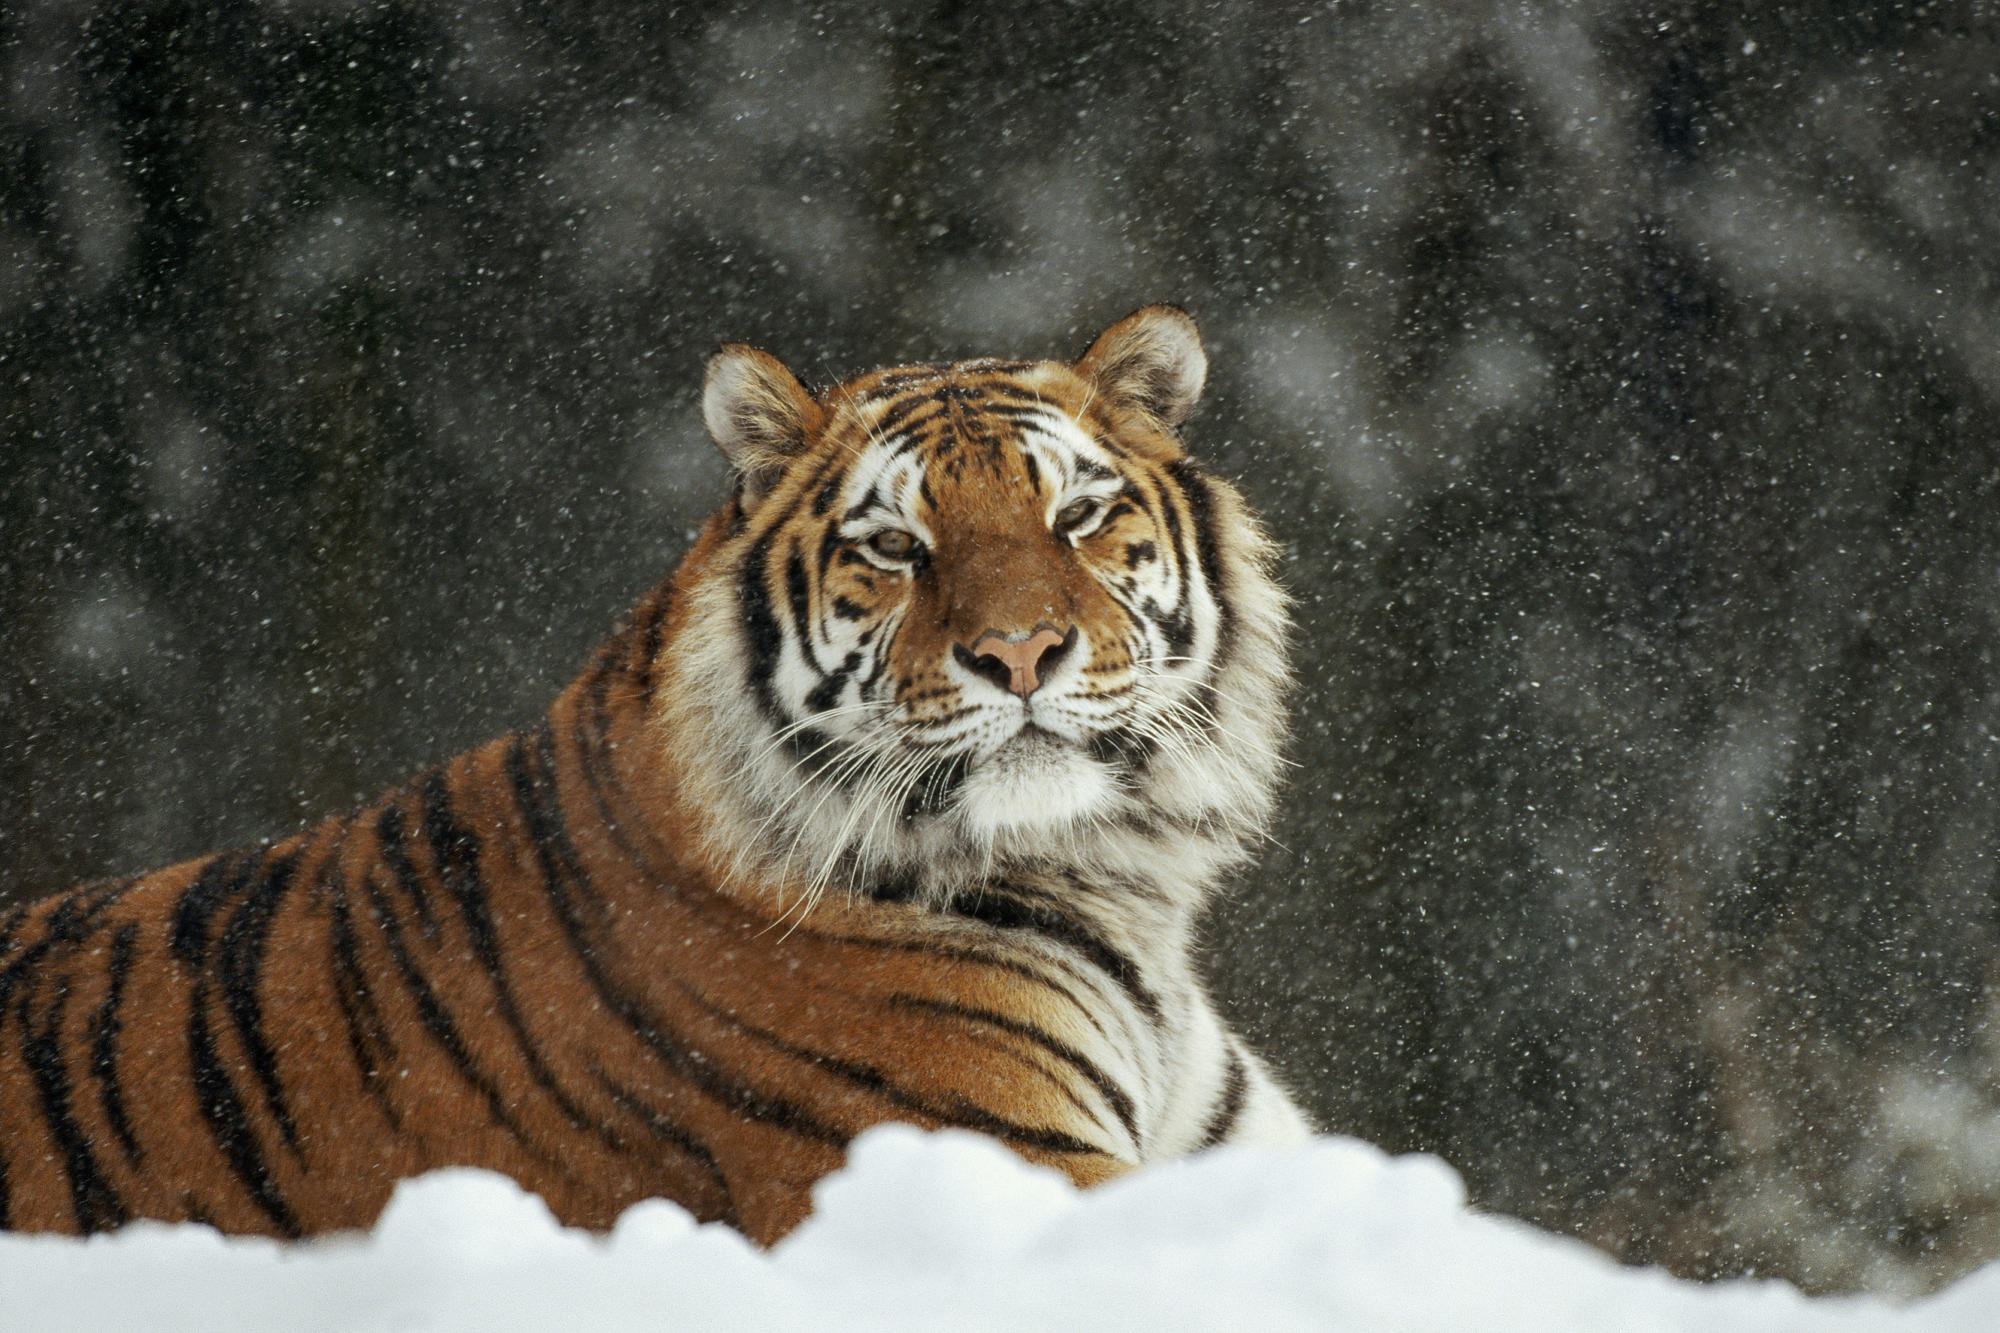 111156 download wallpaper animals, snow, predator, big cat, tiger, snowfall screensavers and pictures for free